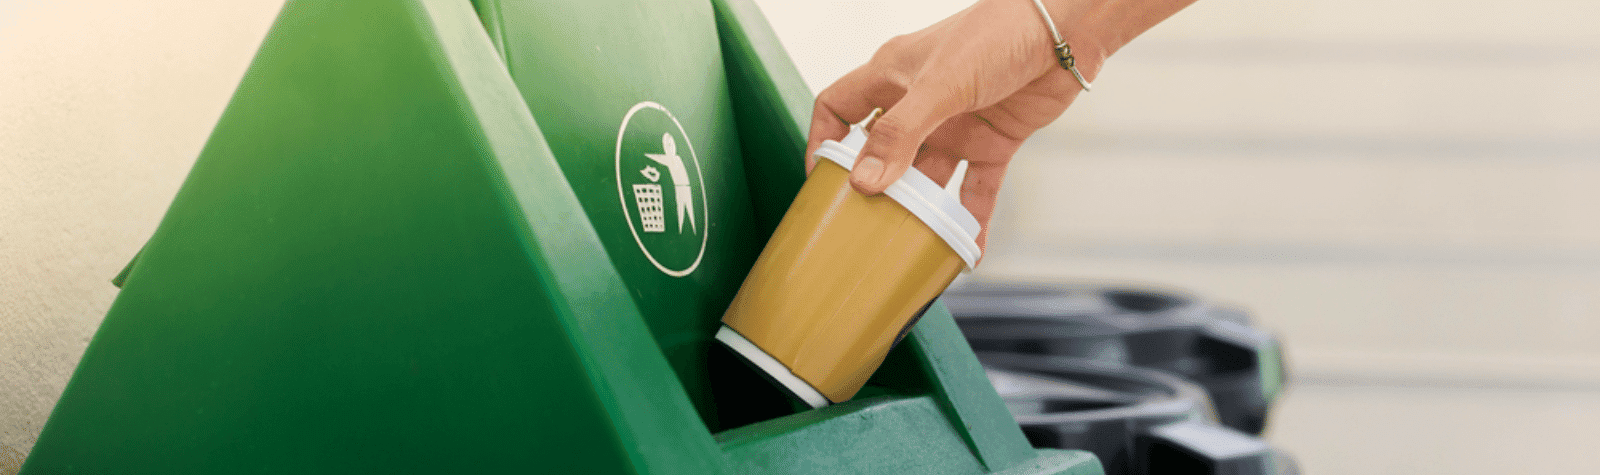 Don’t let your coffee cup trash the planet